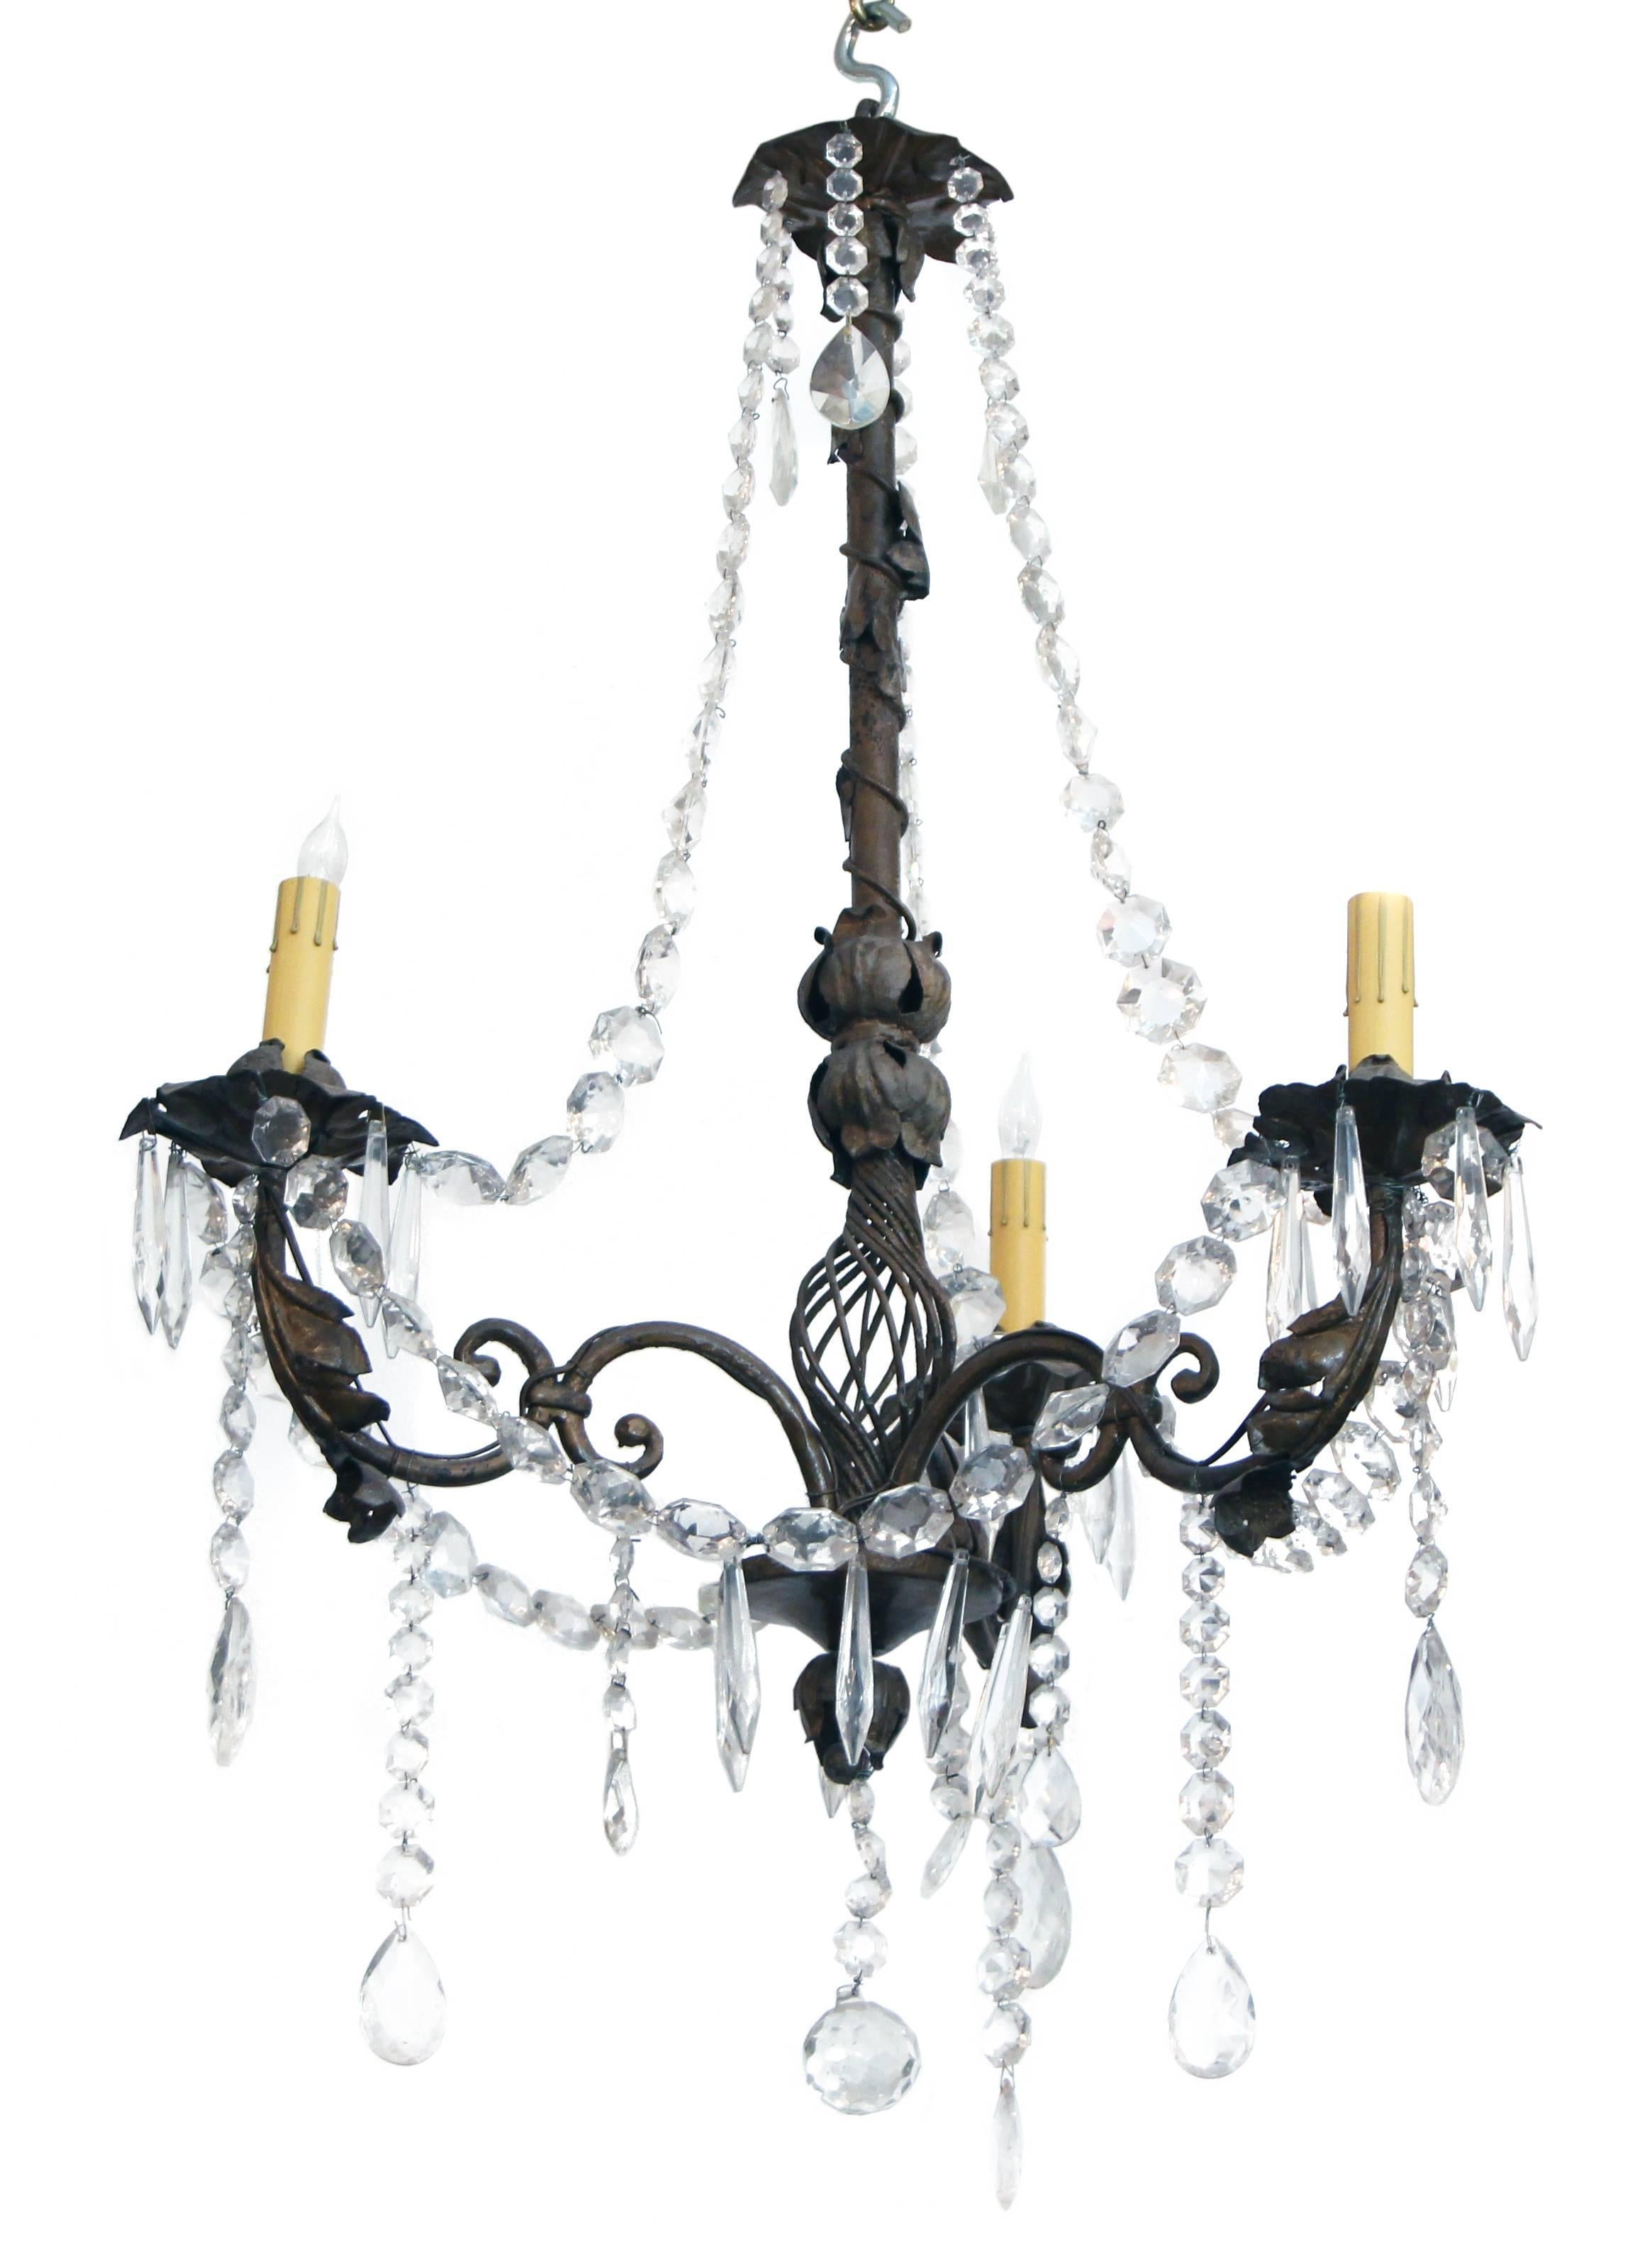 French leafed bronze three arm chandelier with beaded crystals hanging throughout. Cleaned and rewired. Please note, this item is located in one of our NYC locations.